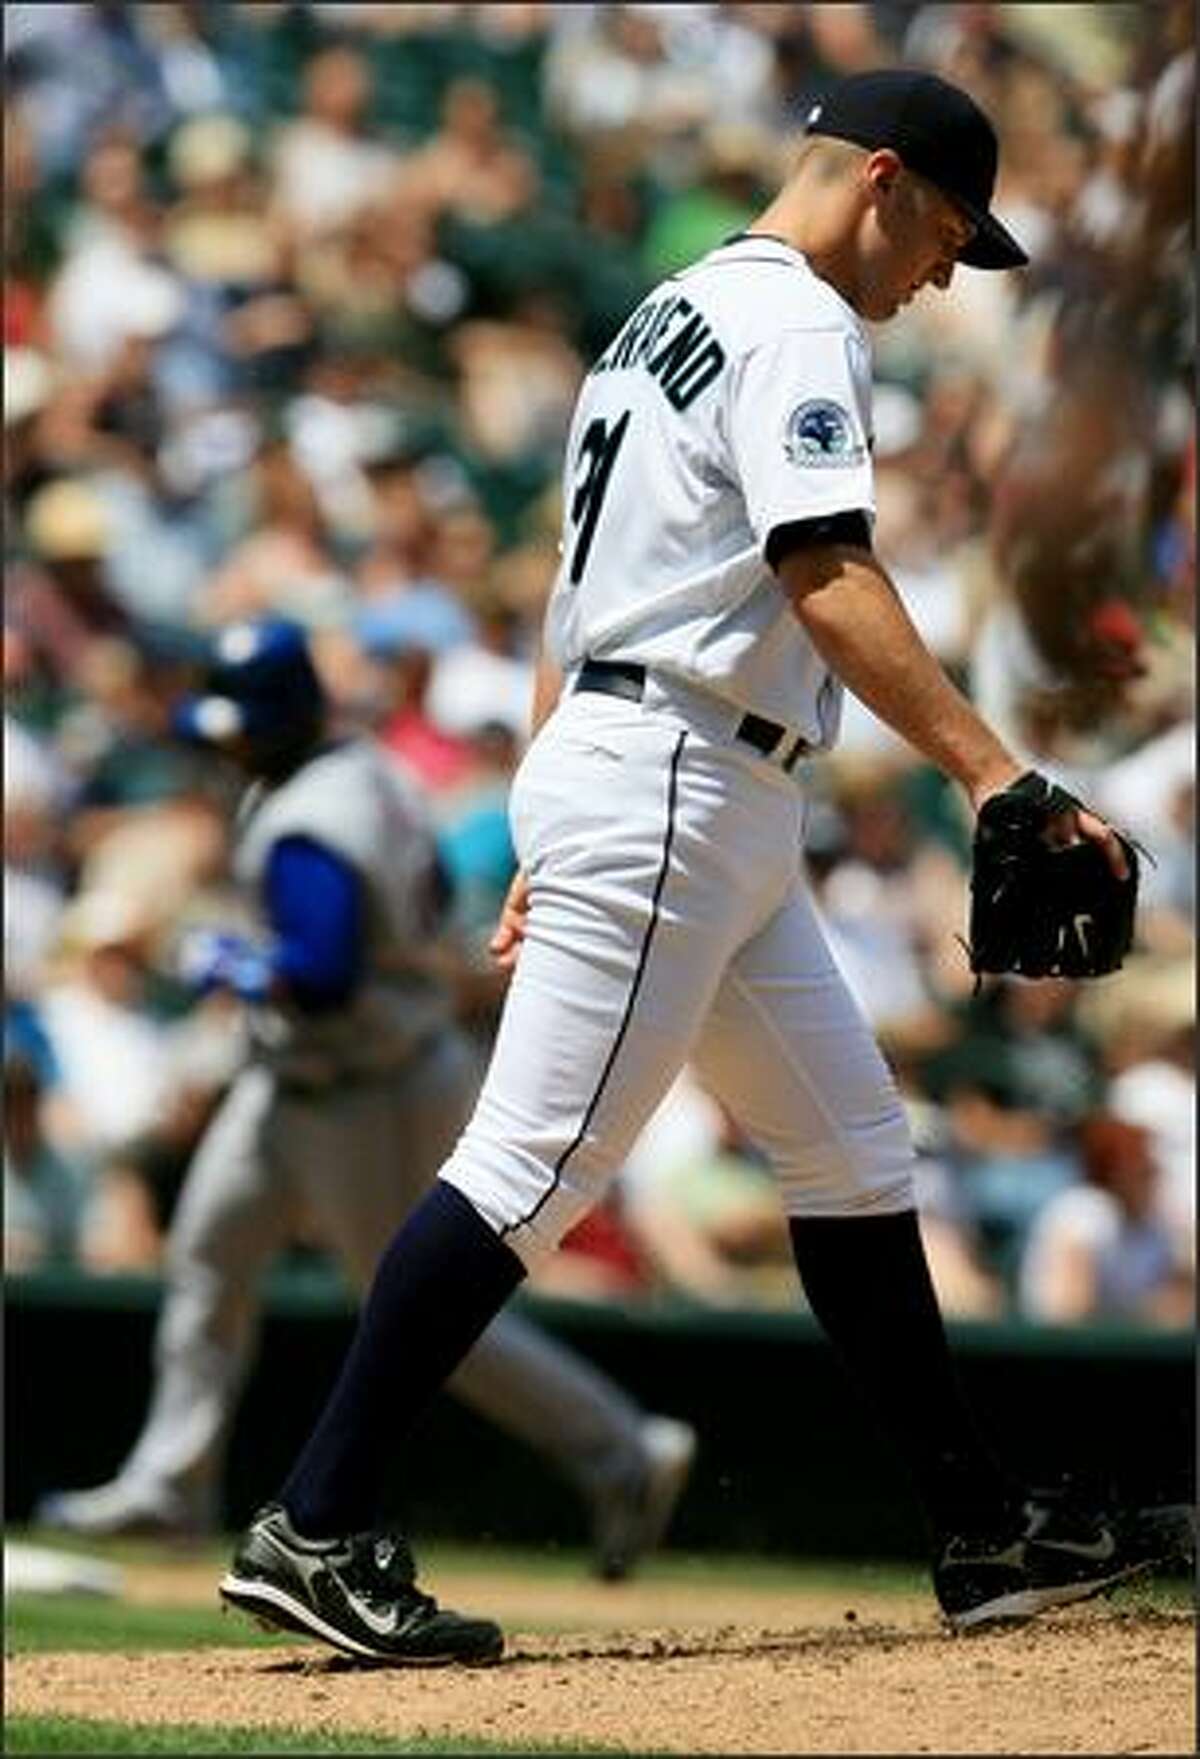 Seattle Mariners starter Ryan Feierabend heads back to the mound after giving up a three-run homer to Texas Rangers Victor Diaz, background, during the 4th inning. Feierabend recovered, throwing 7 and 1/3 innings, to register his first major league win.